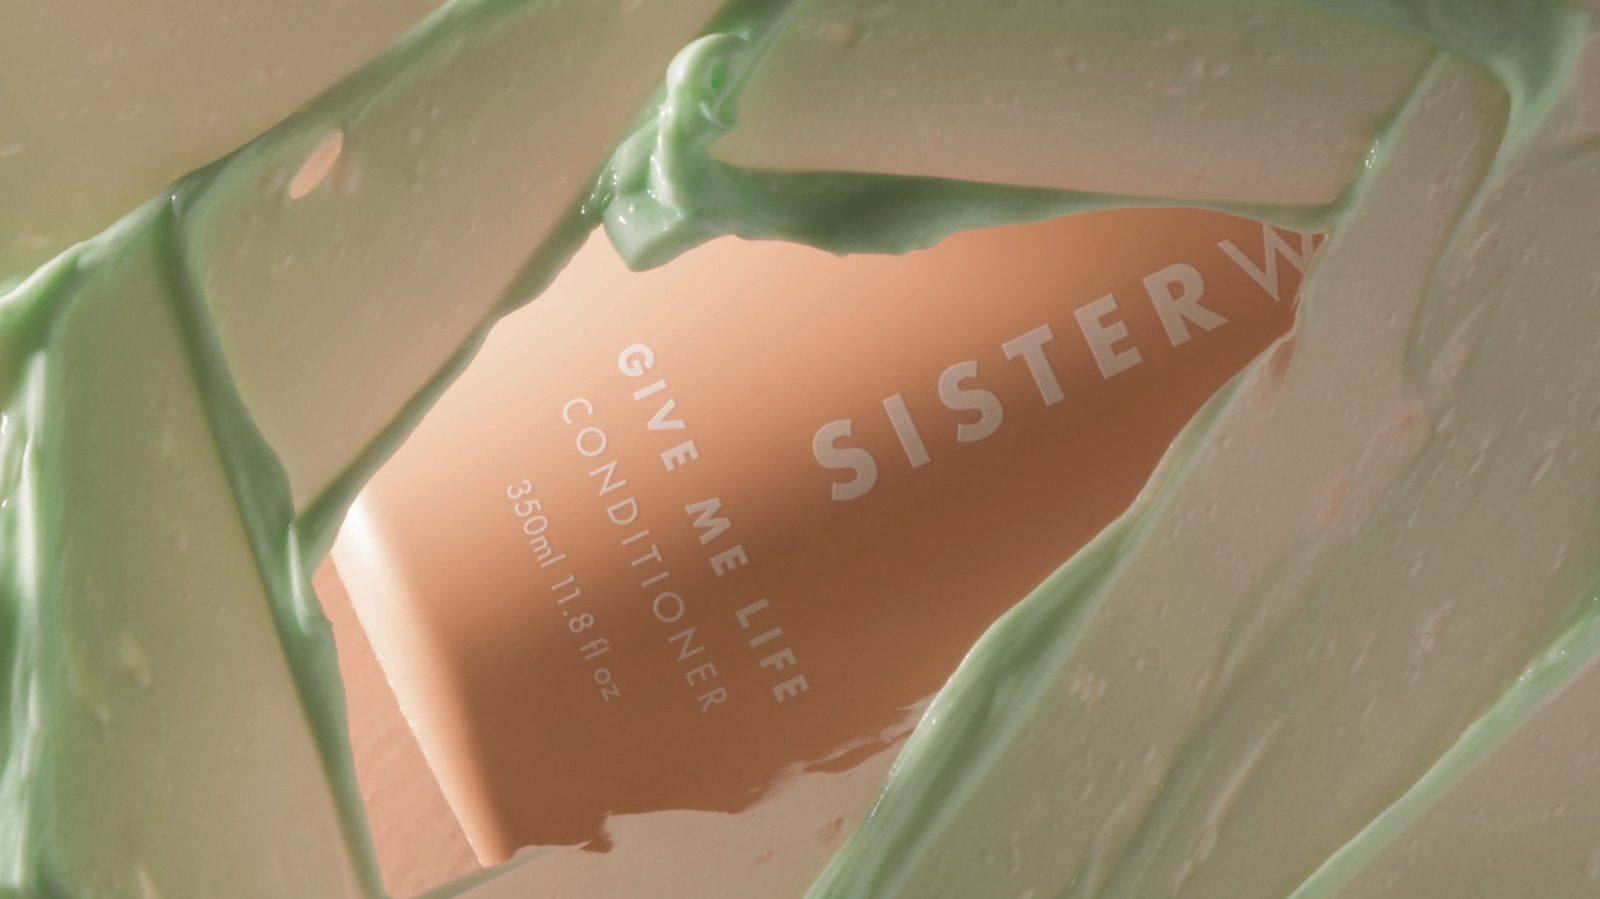 Sisterwould bottle of hair conditioner seen smeared with green conditioner product